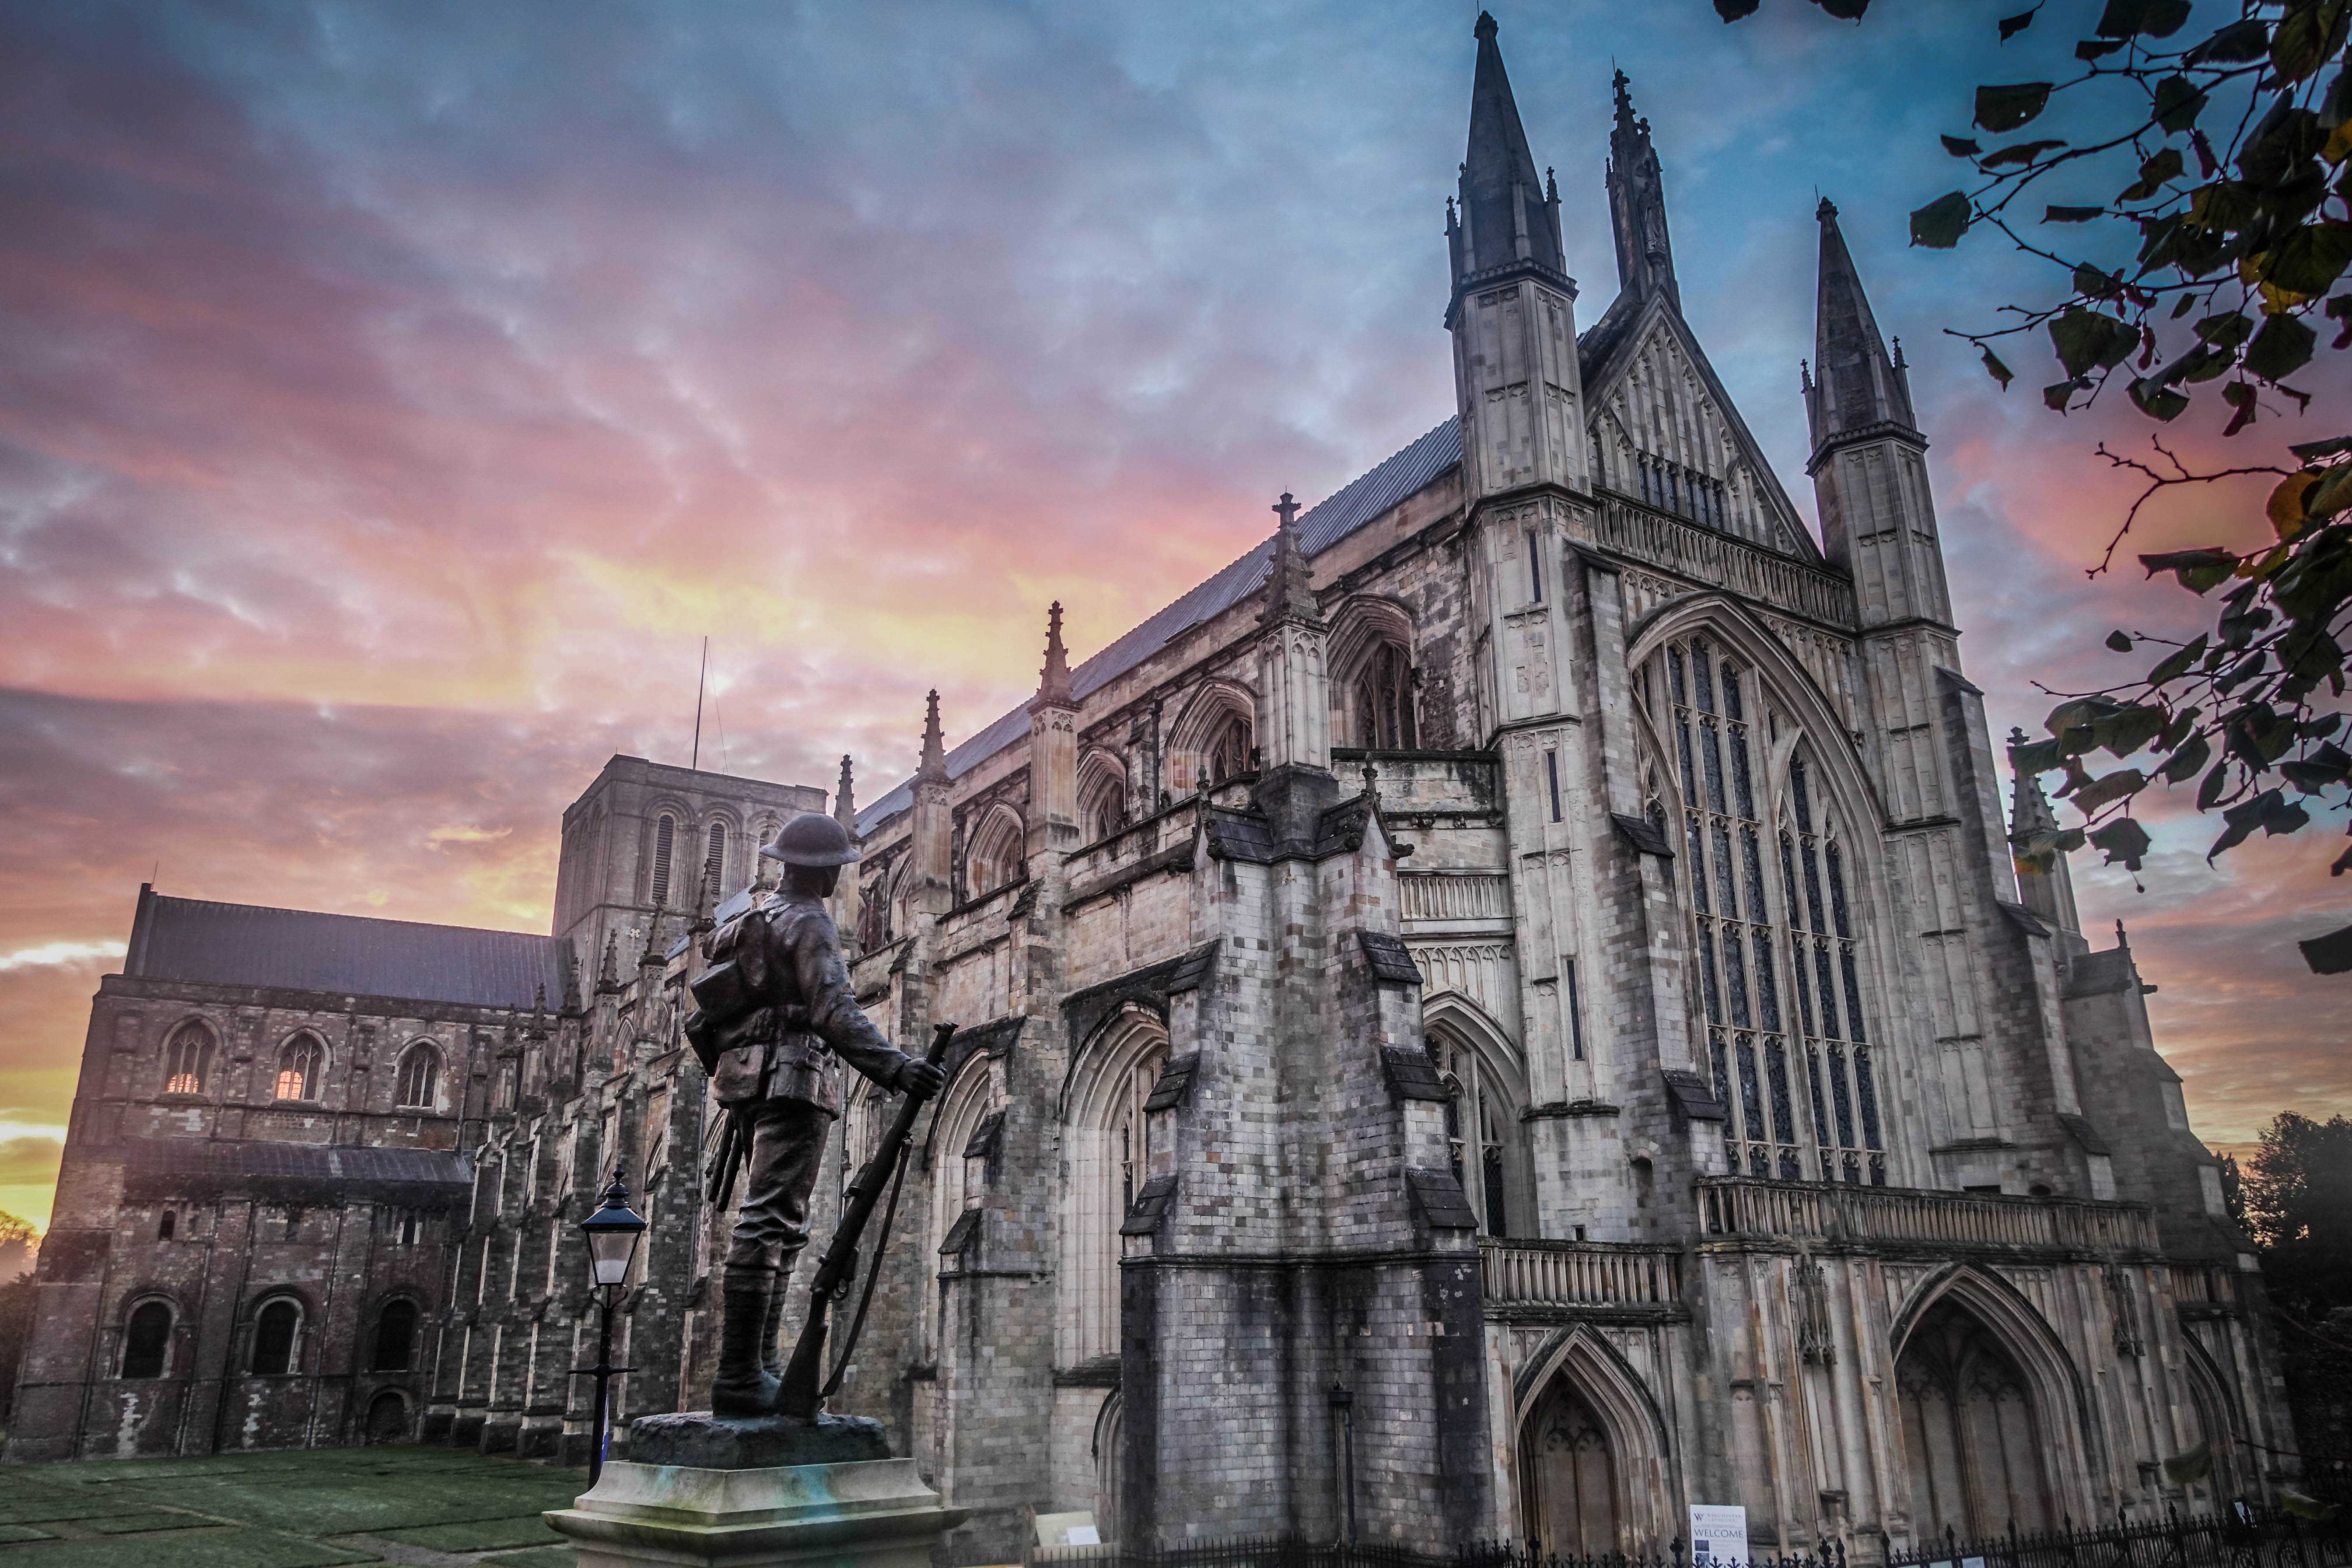 History & heritage - Visit Winchester